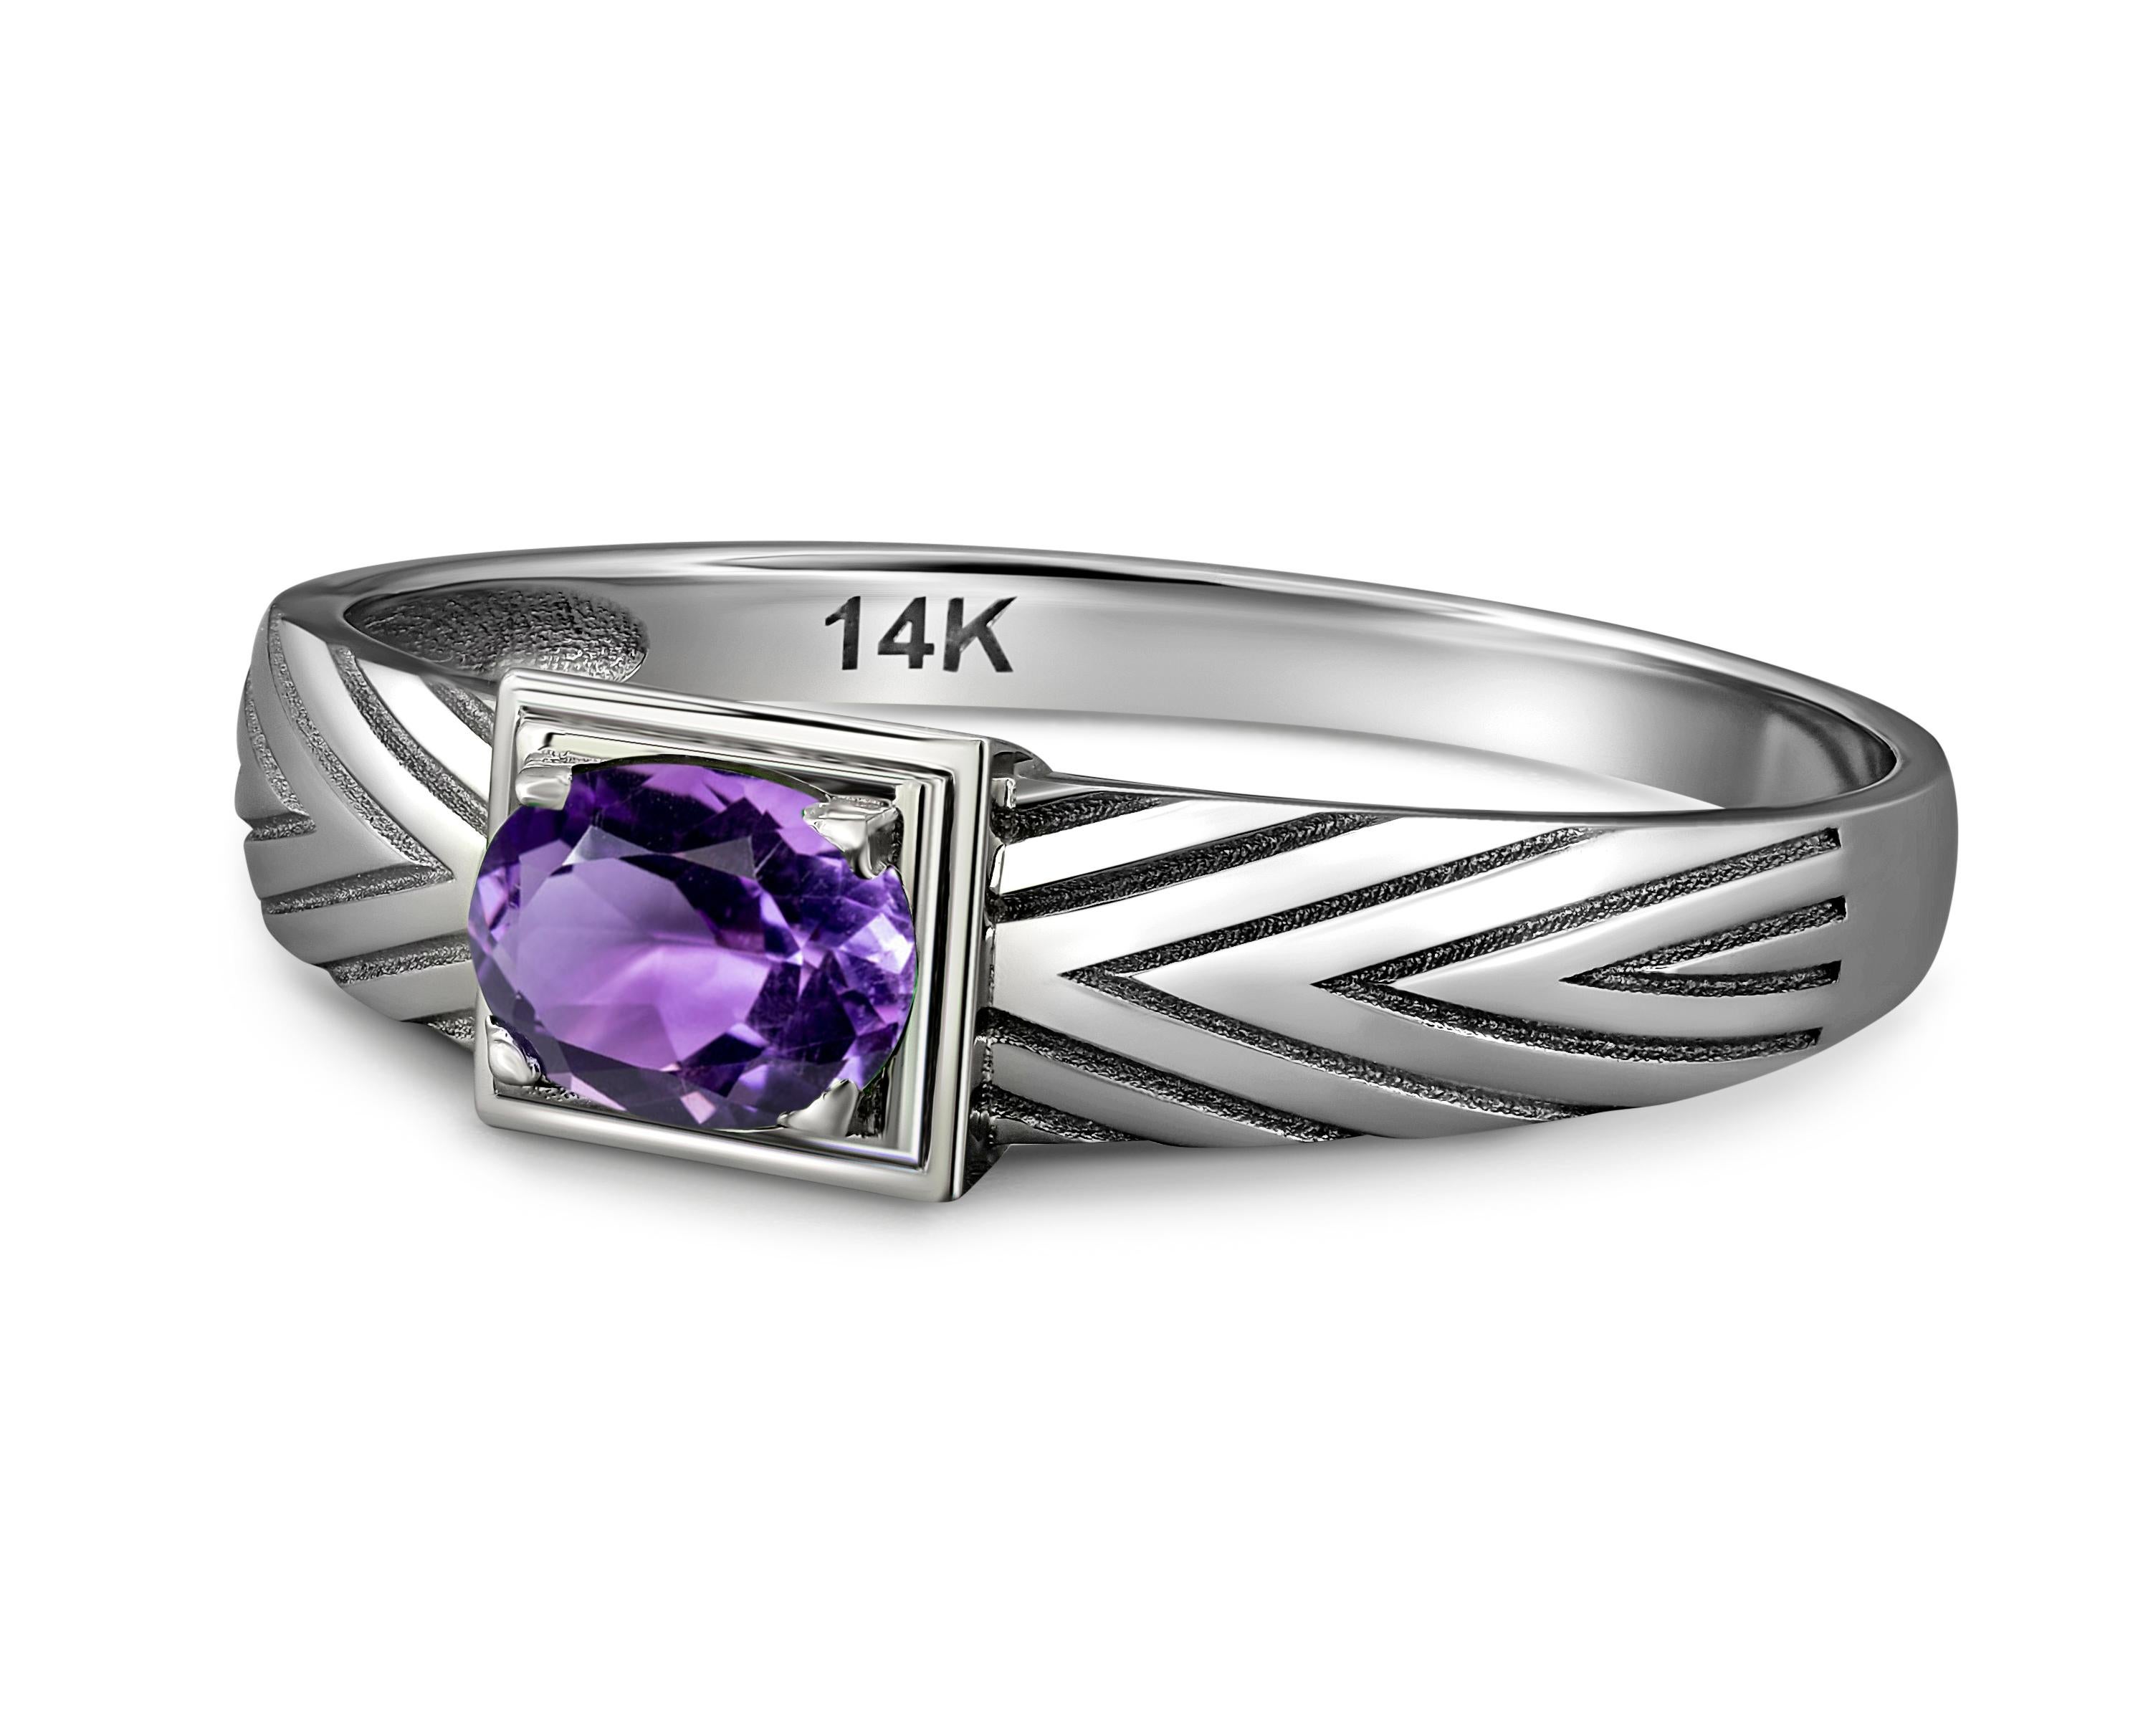 14K Gold Mens Ring with Amethyst. 
Gold ring for men with amethyst. Unisex ring with amethyst. Natural amethyst ring. Oval amethyst ring. 

Metal: 14k gold
Weight: 1.8 g. depends from size

Central stone: Natural amethyst
Weight - approx 1 ct, oval